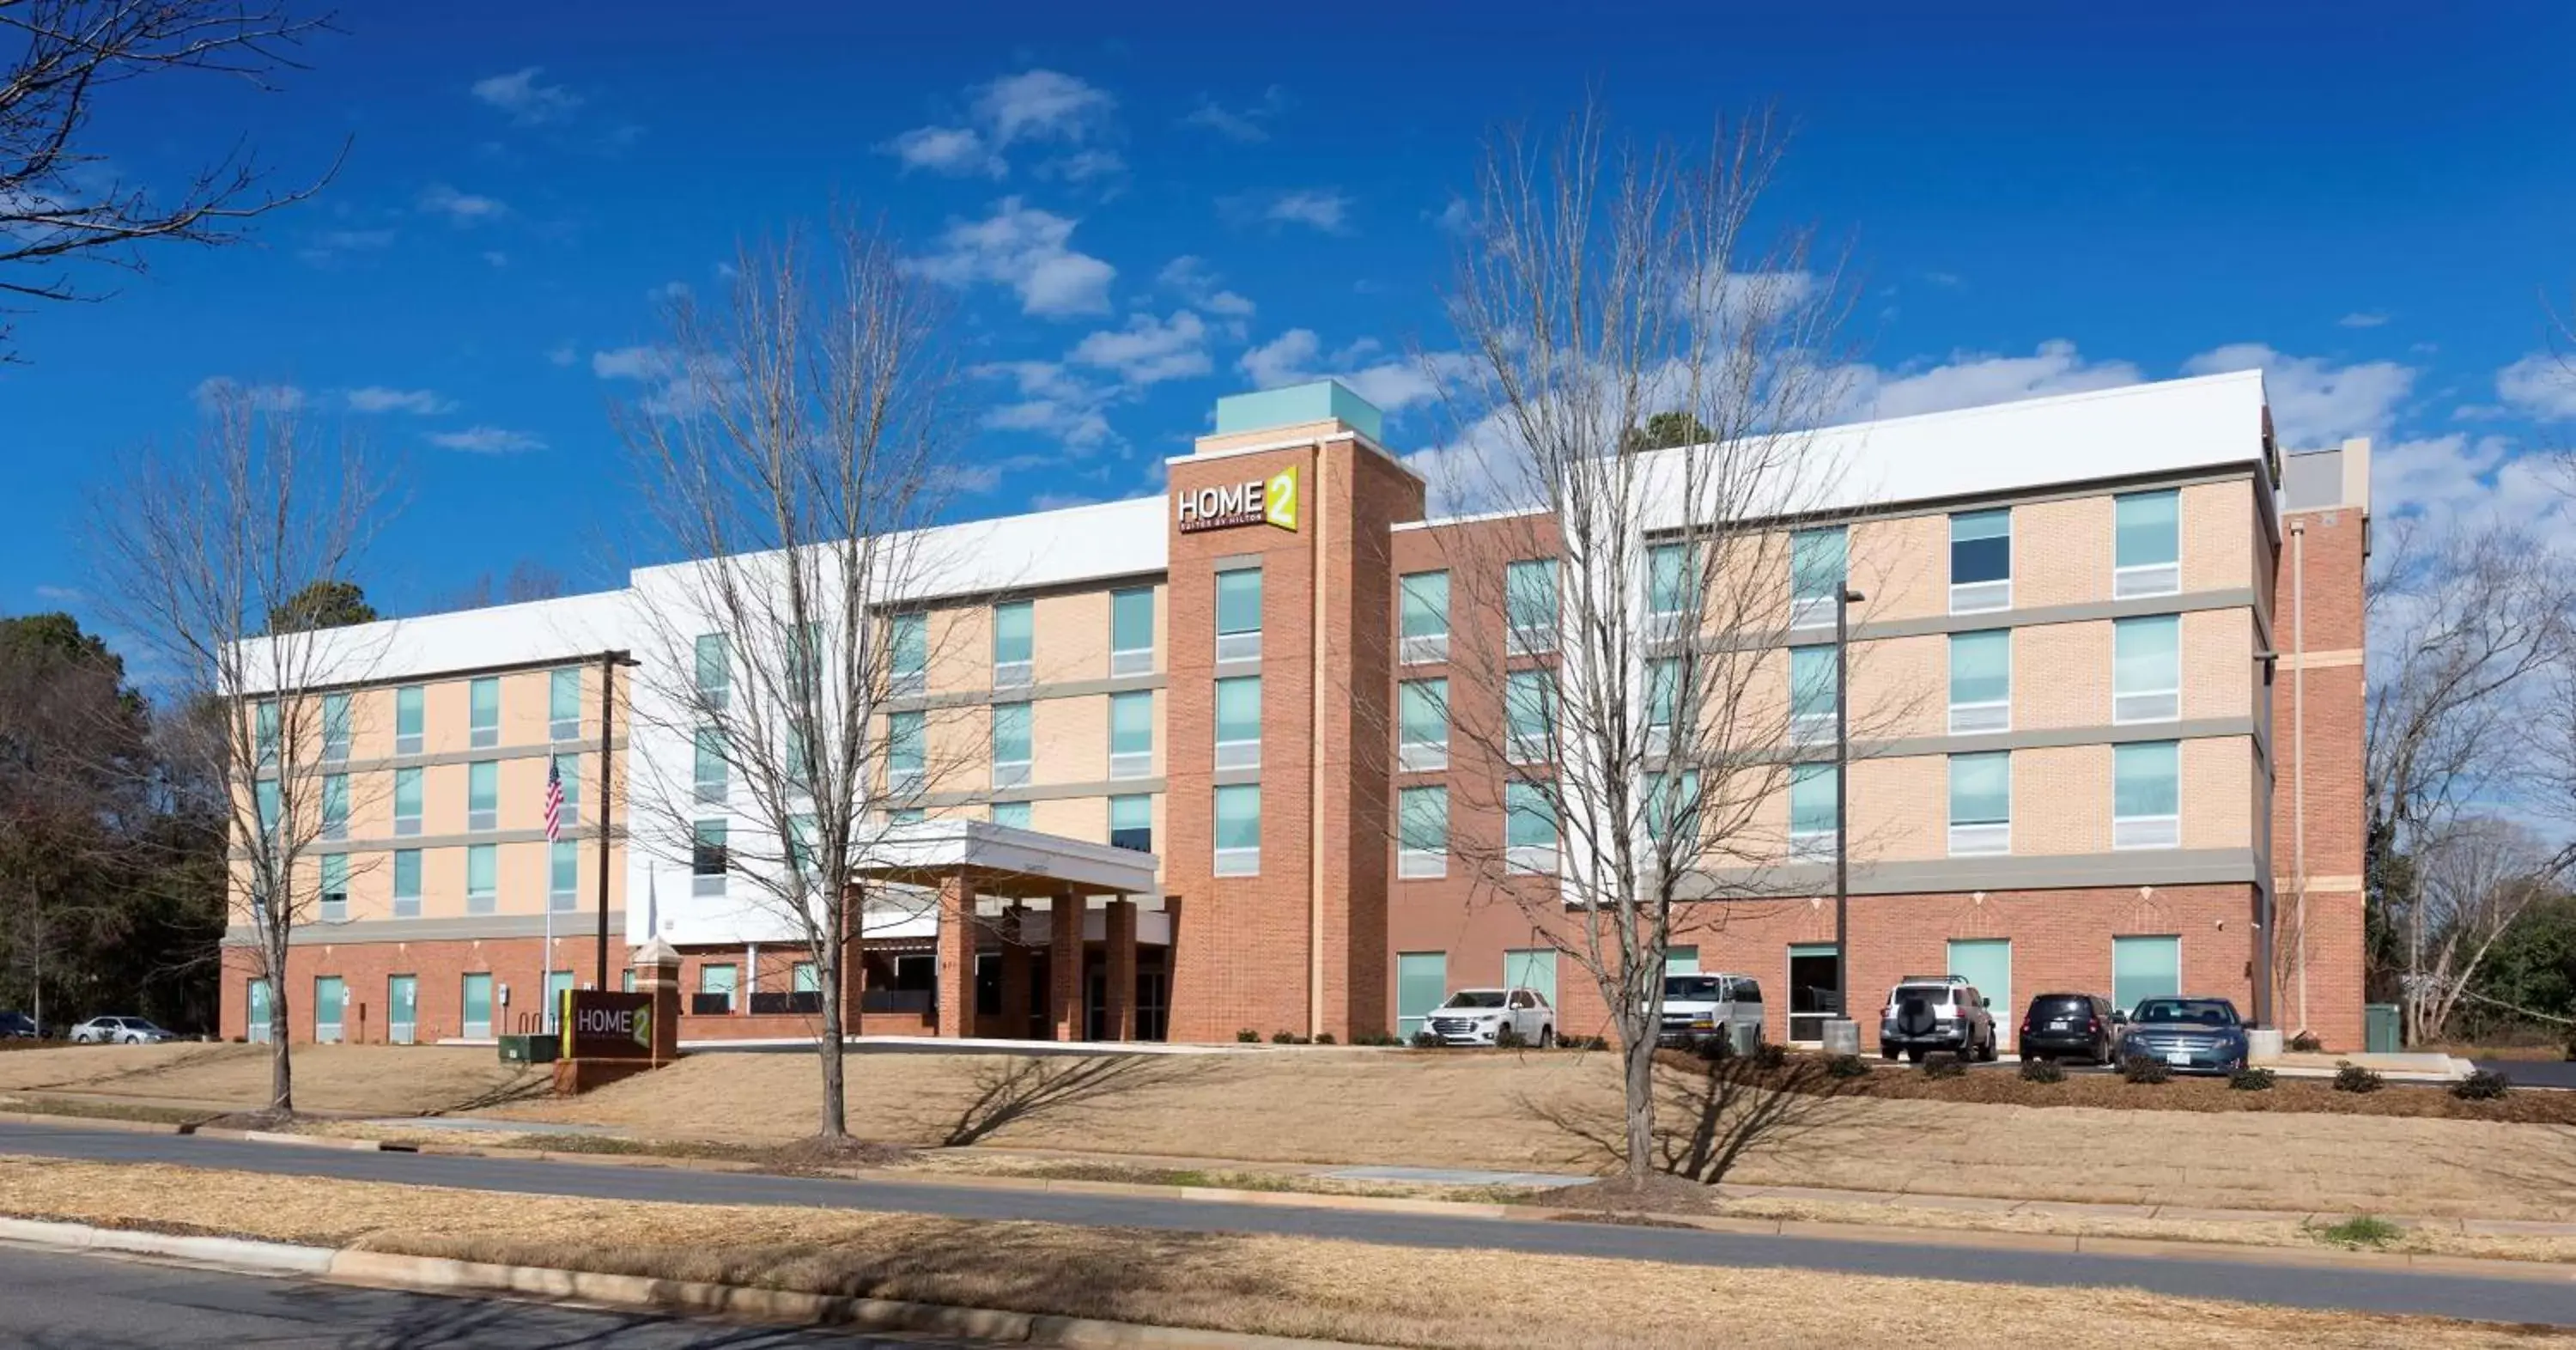 Property Building in Home2 Suites By Hilton Charlotte Belmont, Nc